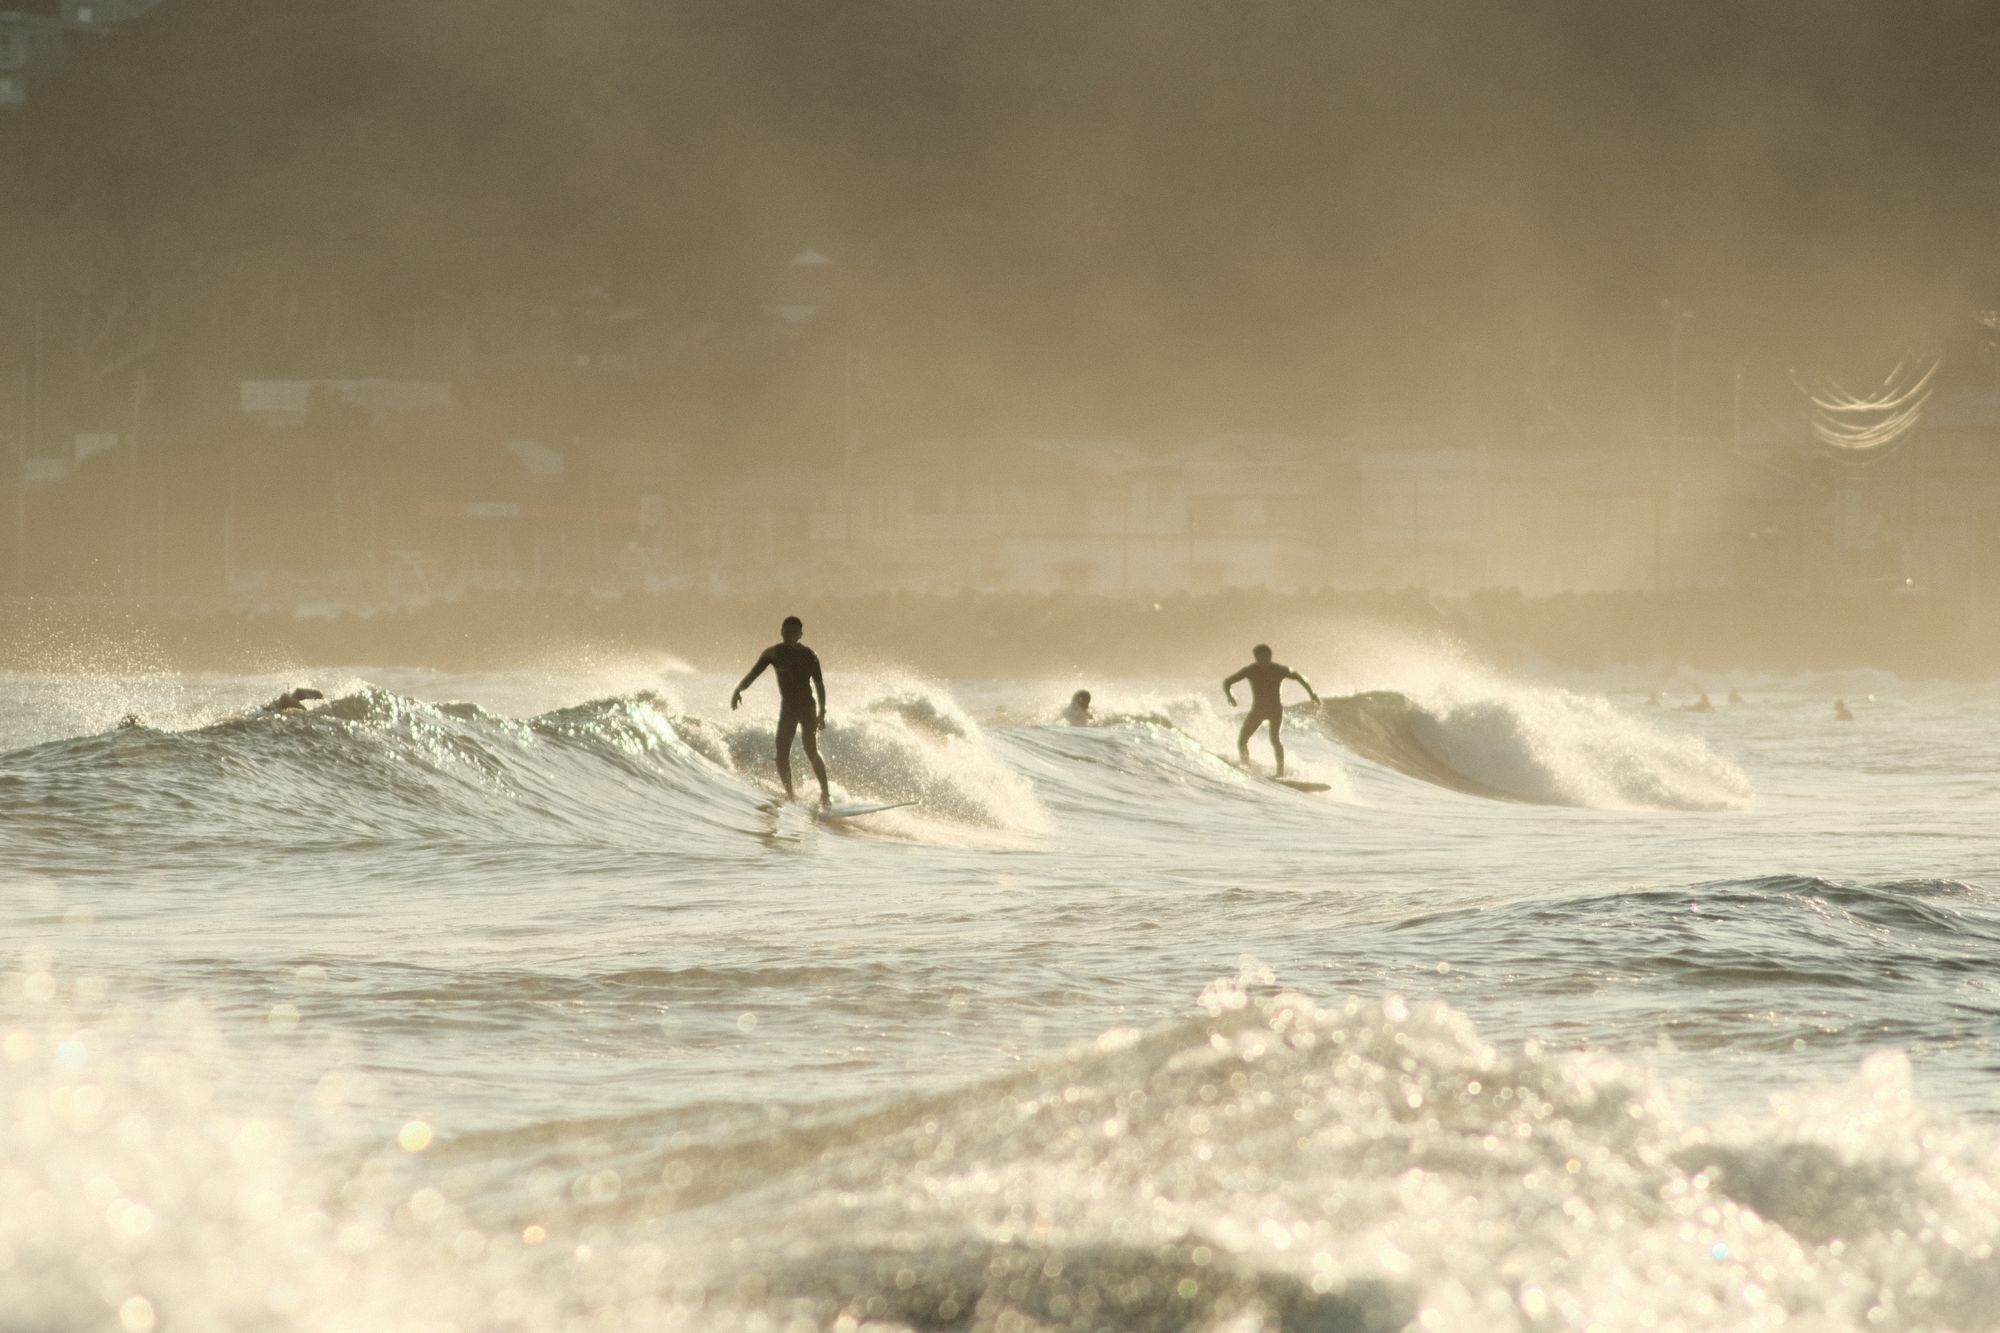 2 surfers on a wave at golden hour in Onjuku, Japan